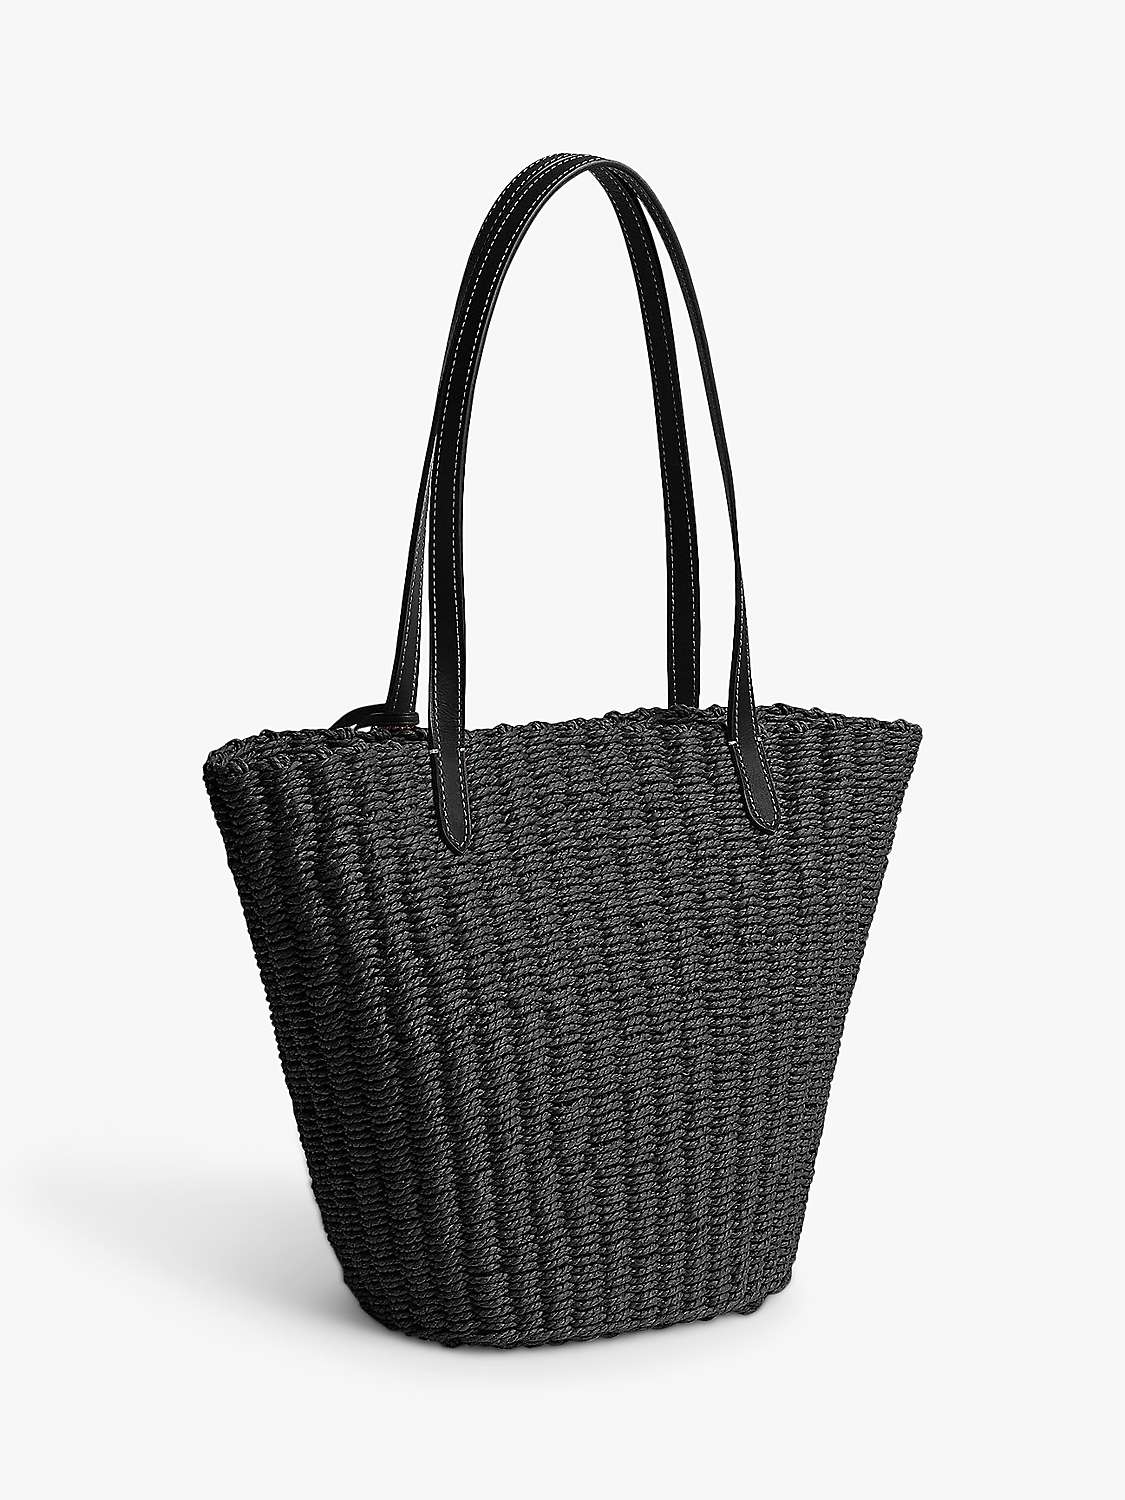 Buy Coach Small Straw Tote Bag Online at johnlewis.com